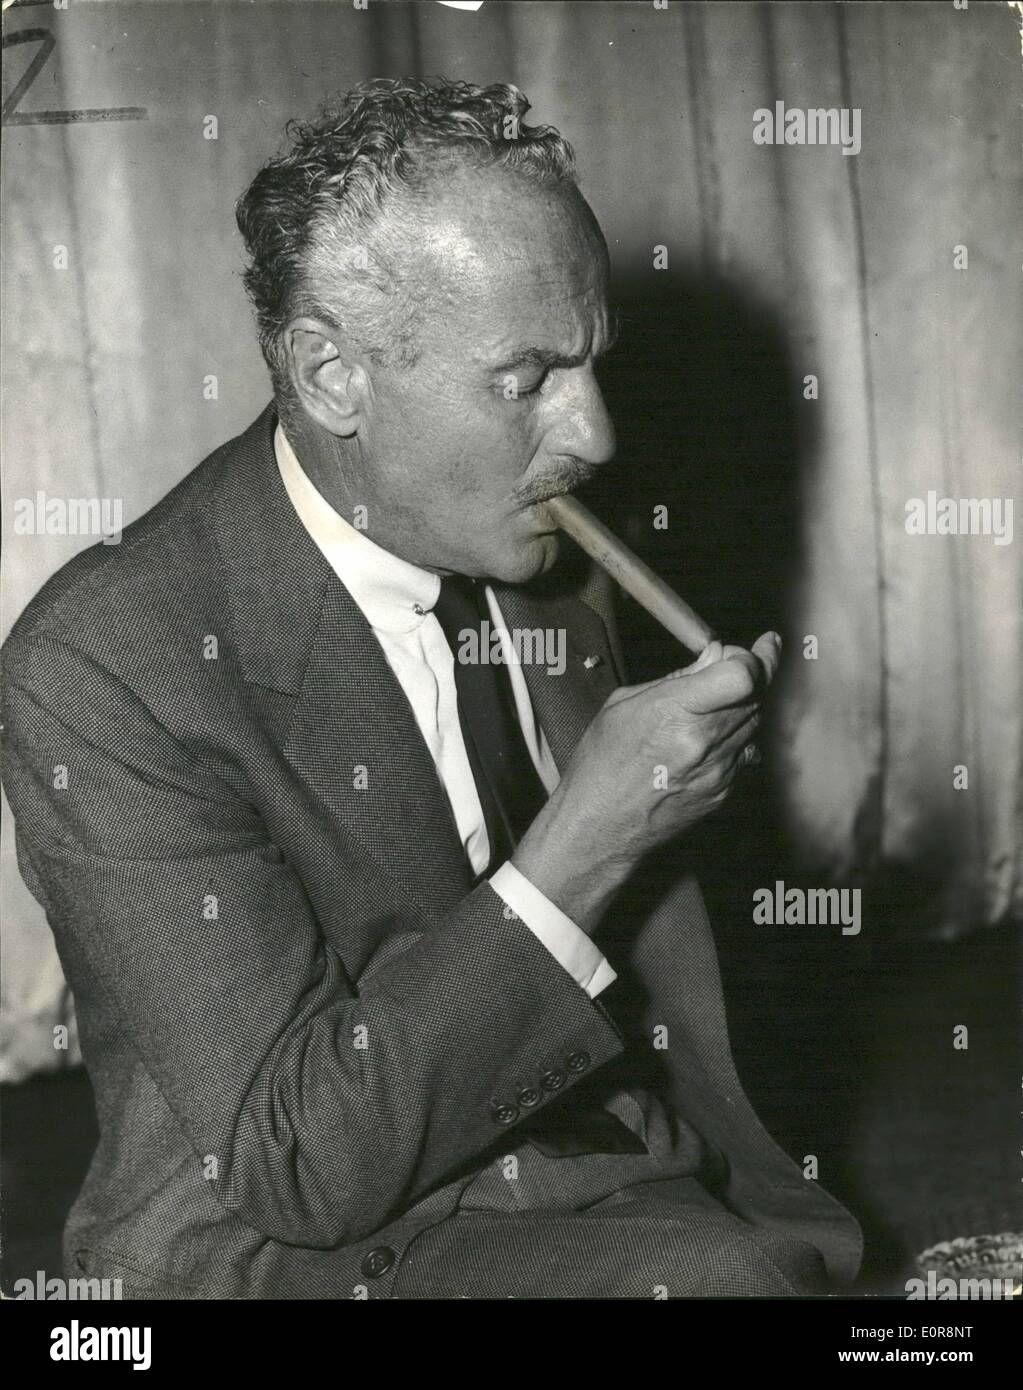 Aug. 08, 1958 - Darryl Zanuck is in London for post-production work on his production of ''Roots of heaven''. producer Darryl Zanuck has arrived in London for post production work on his multi-million dollar production of Romain gray's best-seller, ''Roots of heaven''. Directed by John Huston and filmed in french equatorial Africa and Paris, the film co-stars Trevor Howard, Juliet Greece, Errol Flynn, Eddie Albert, Orson wellies and Paul Lukas. Juliet Greece, the french film actress, who was discovered by Zanuck arrived in London yesterday Stock Photo